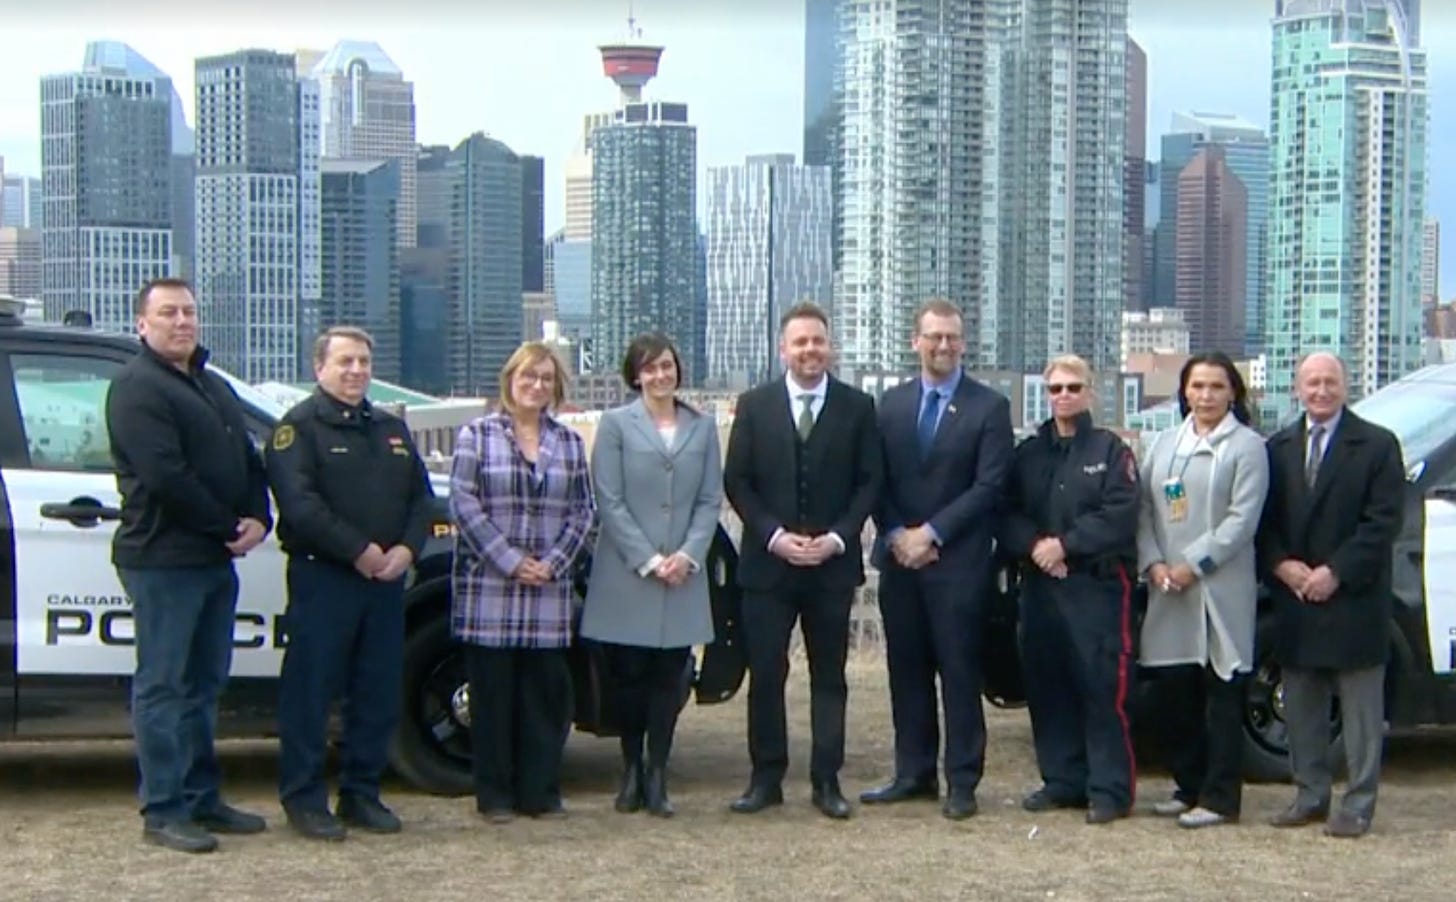 Group of police and politicians gather in front of police cars to make an announcement in front of Calgary downtown